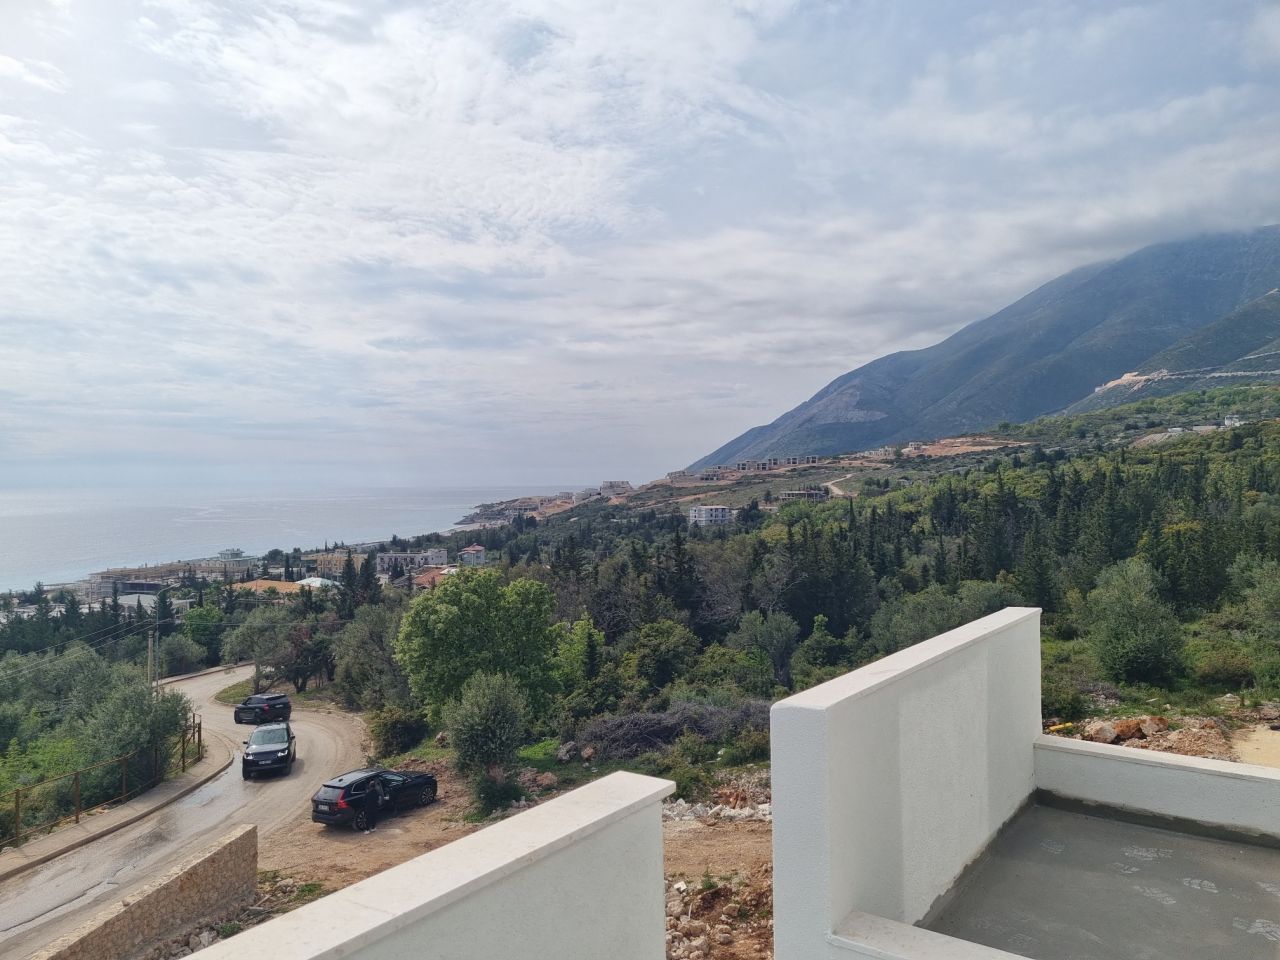 Apartments For Sale In Dhermi, Albania